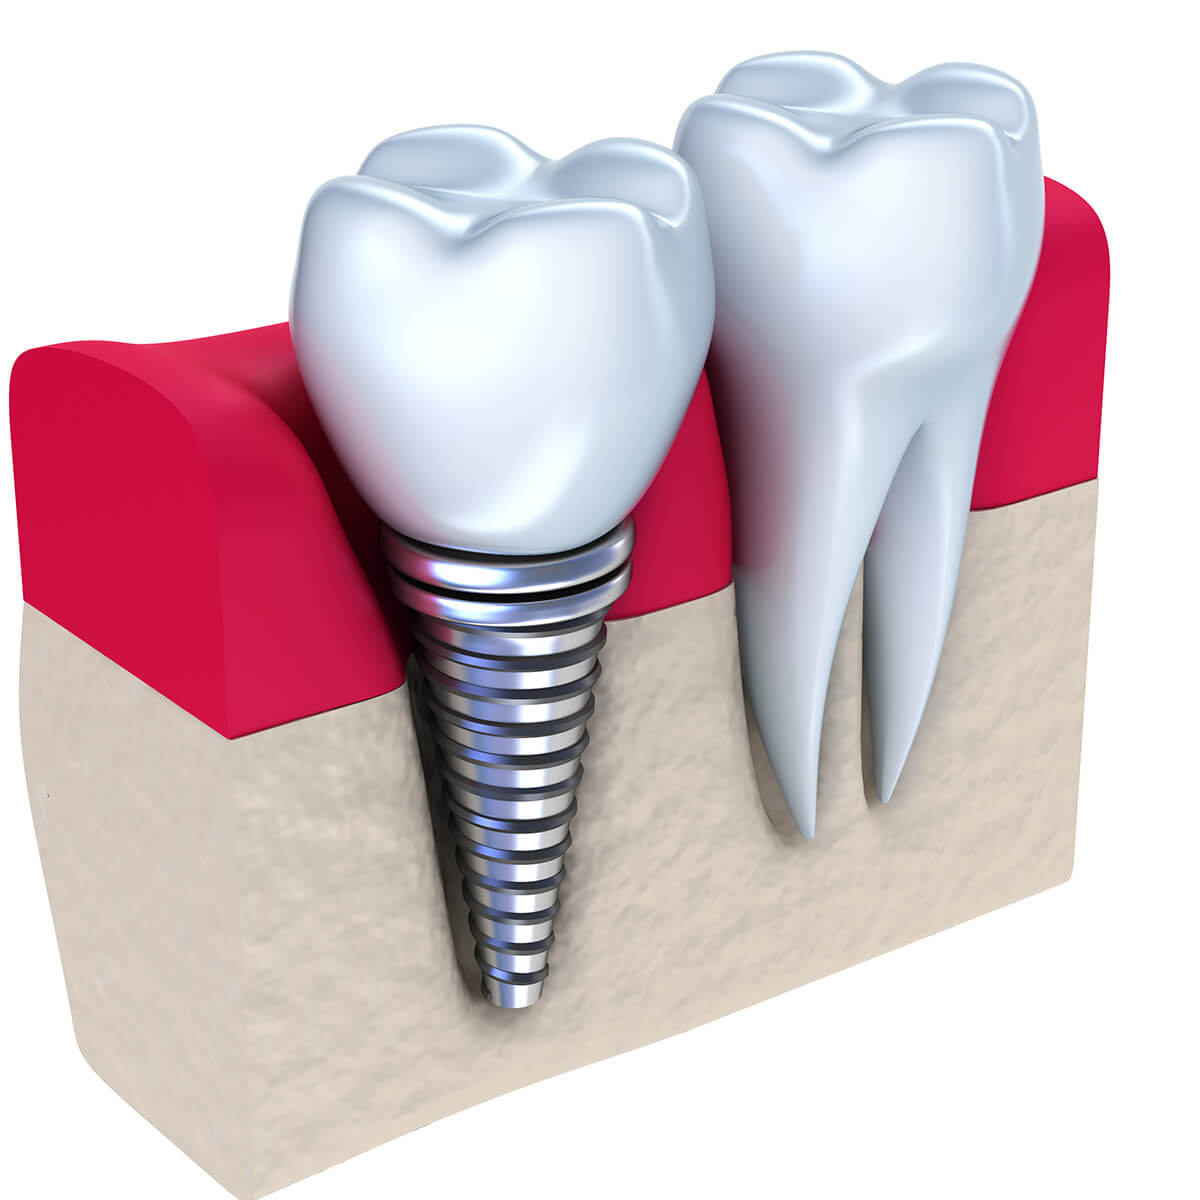 Key factors that affect the cost of dental implants